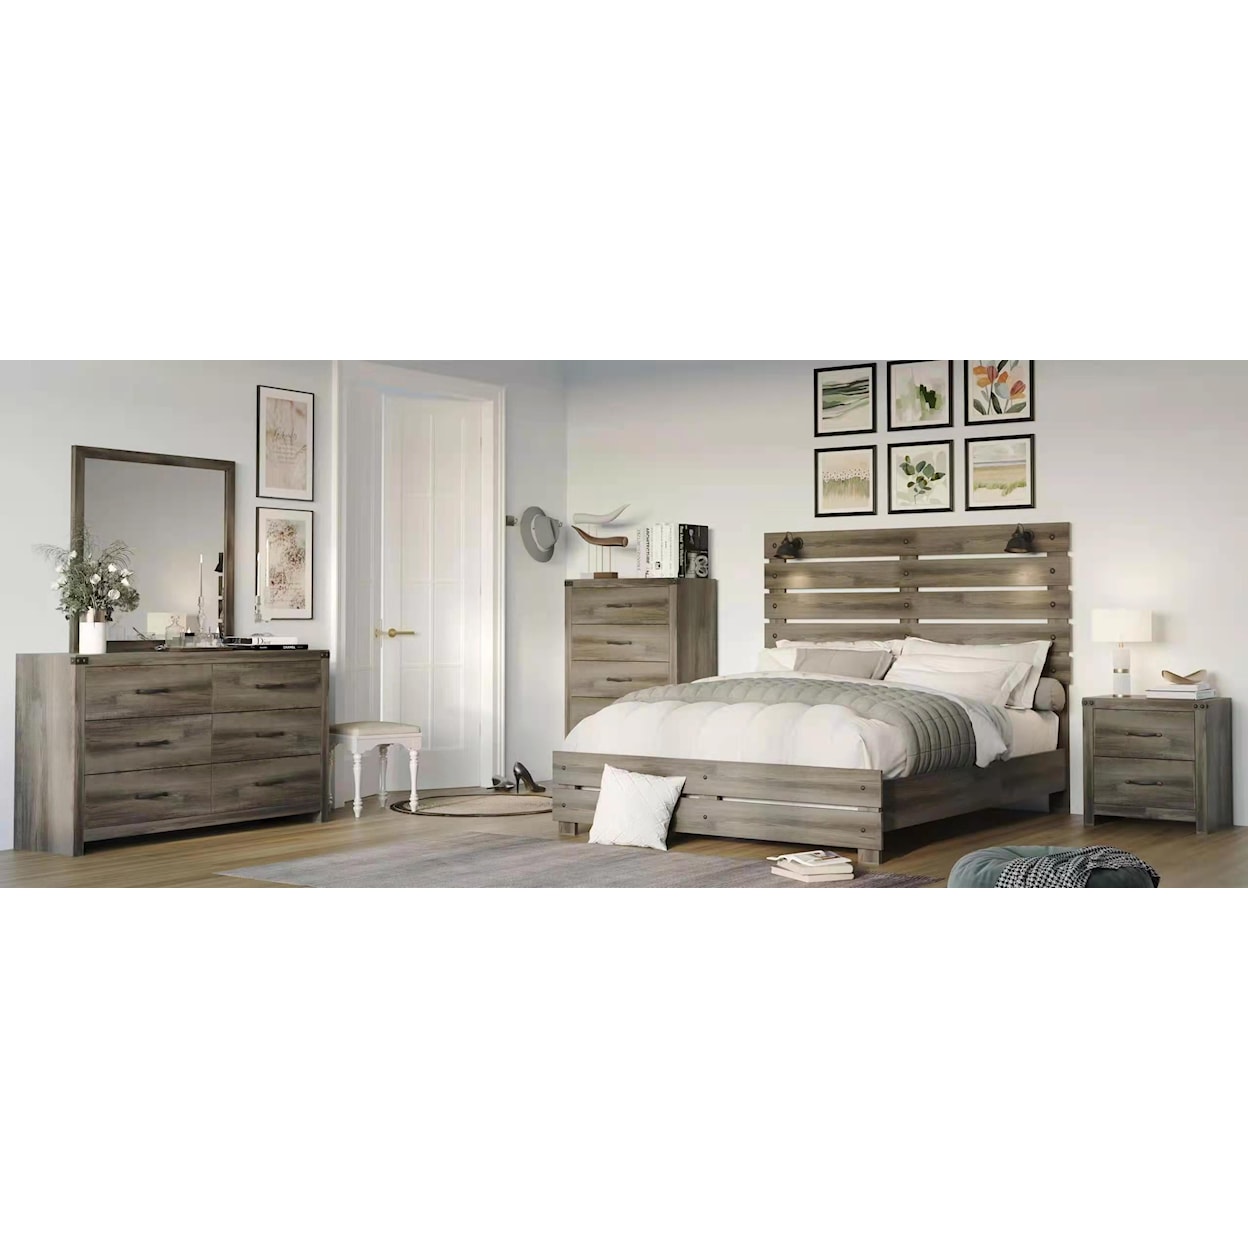 New Classic Furniture Misty Lodge 5-Piece Twin Bedroom Set